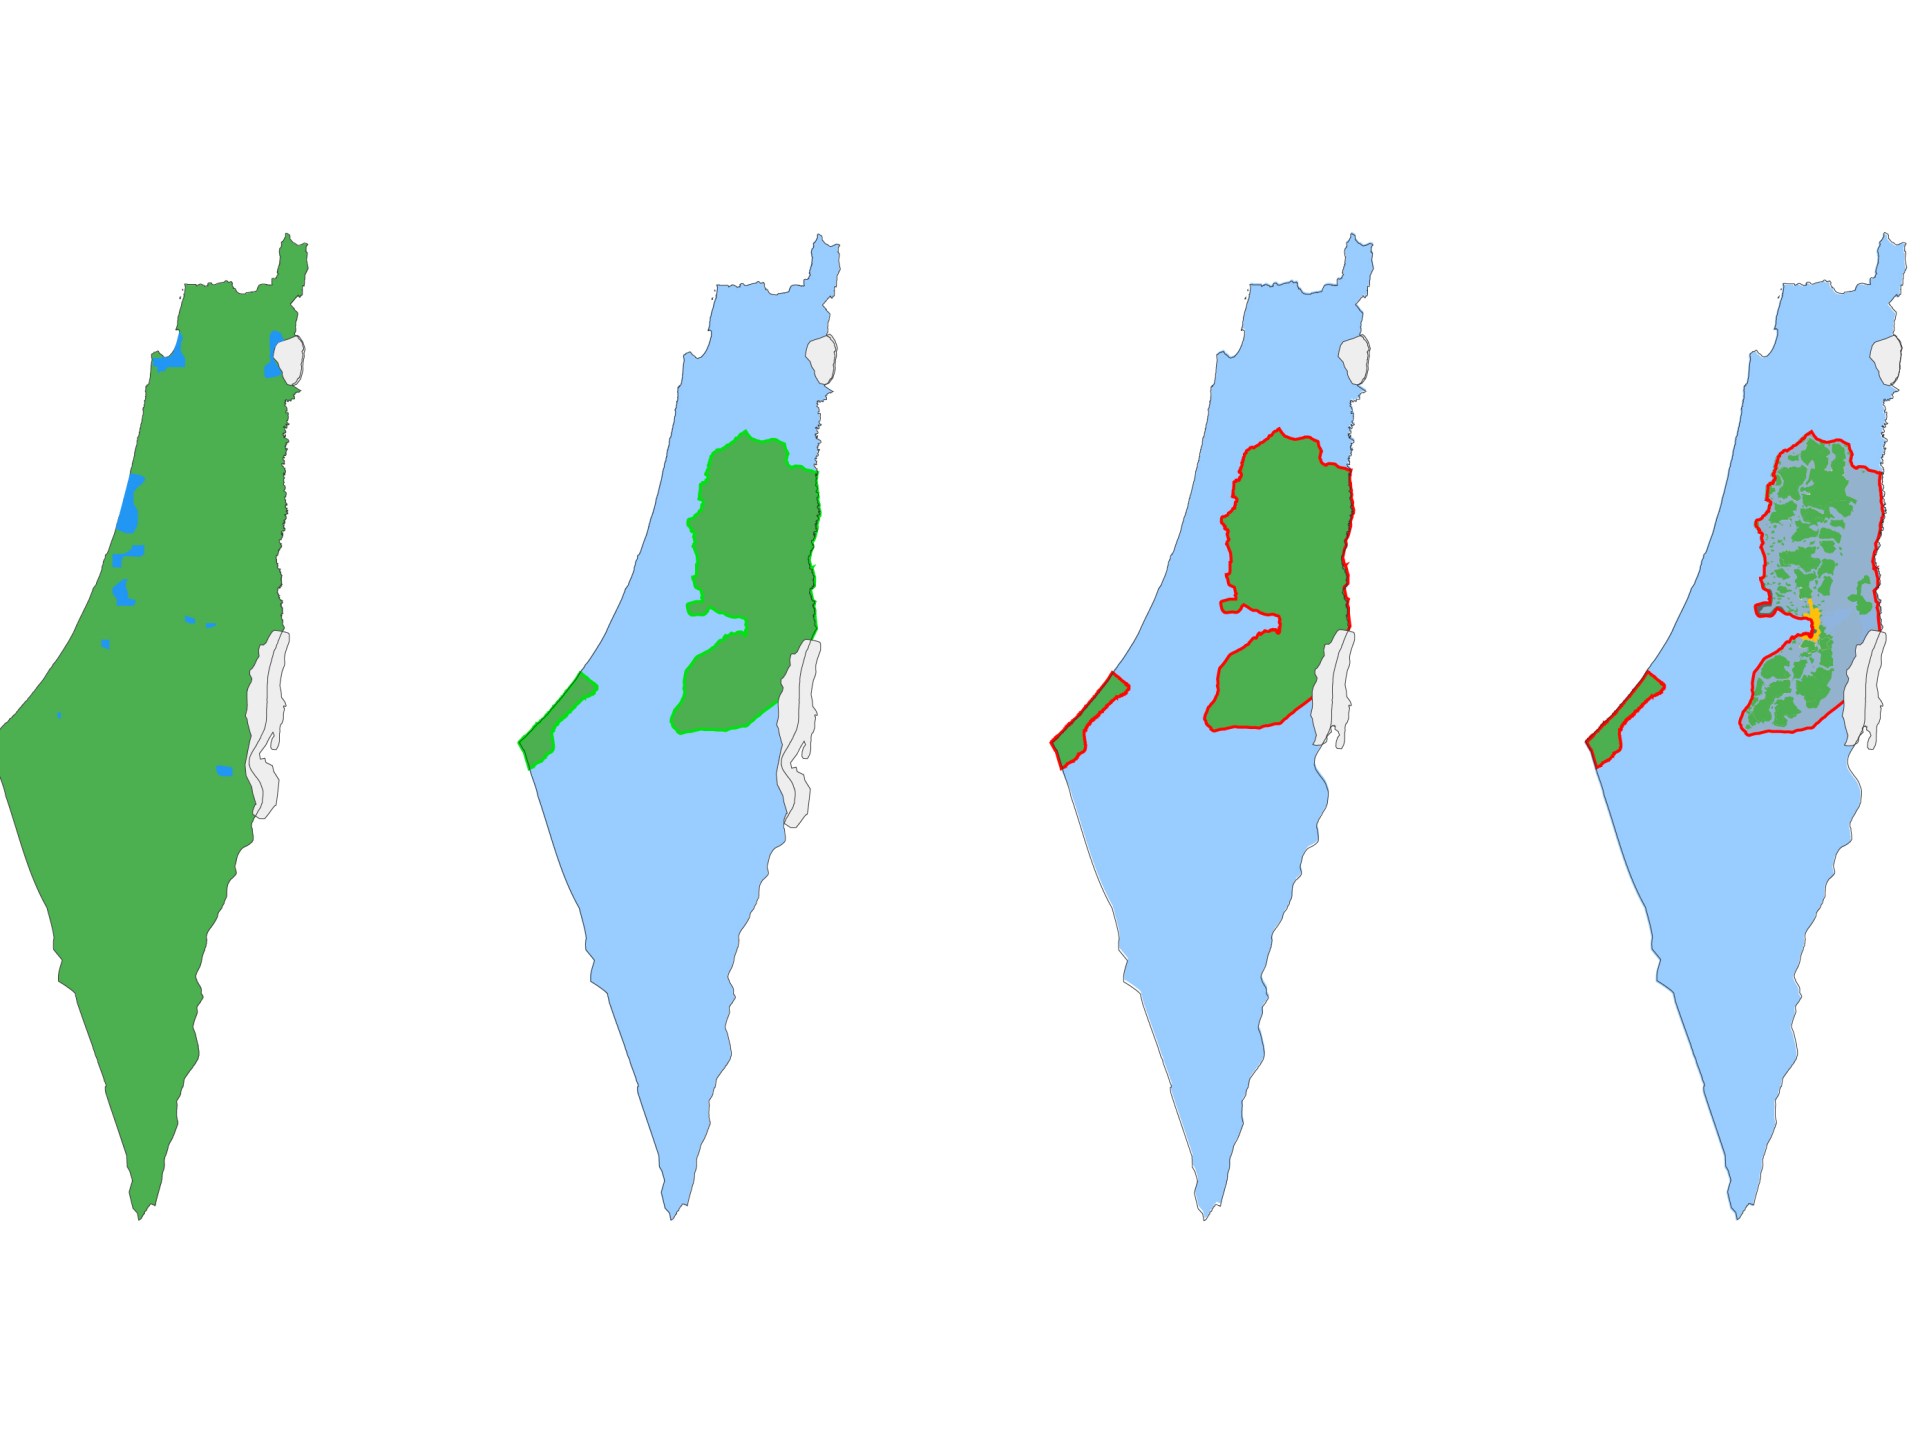 Israel-Palestine conflict: A brief history in maps and charts | Israel-Palestine conflict News